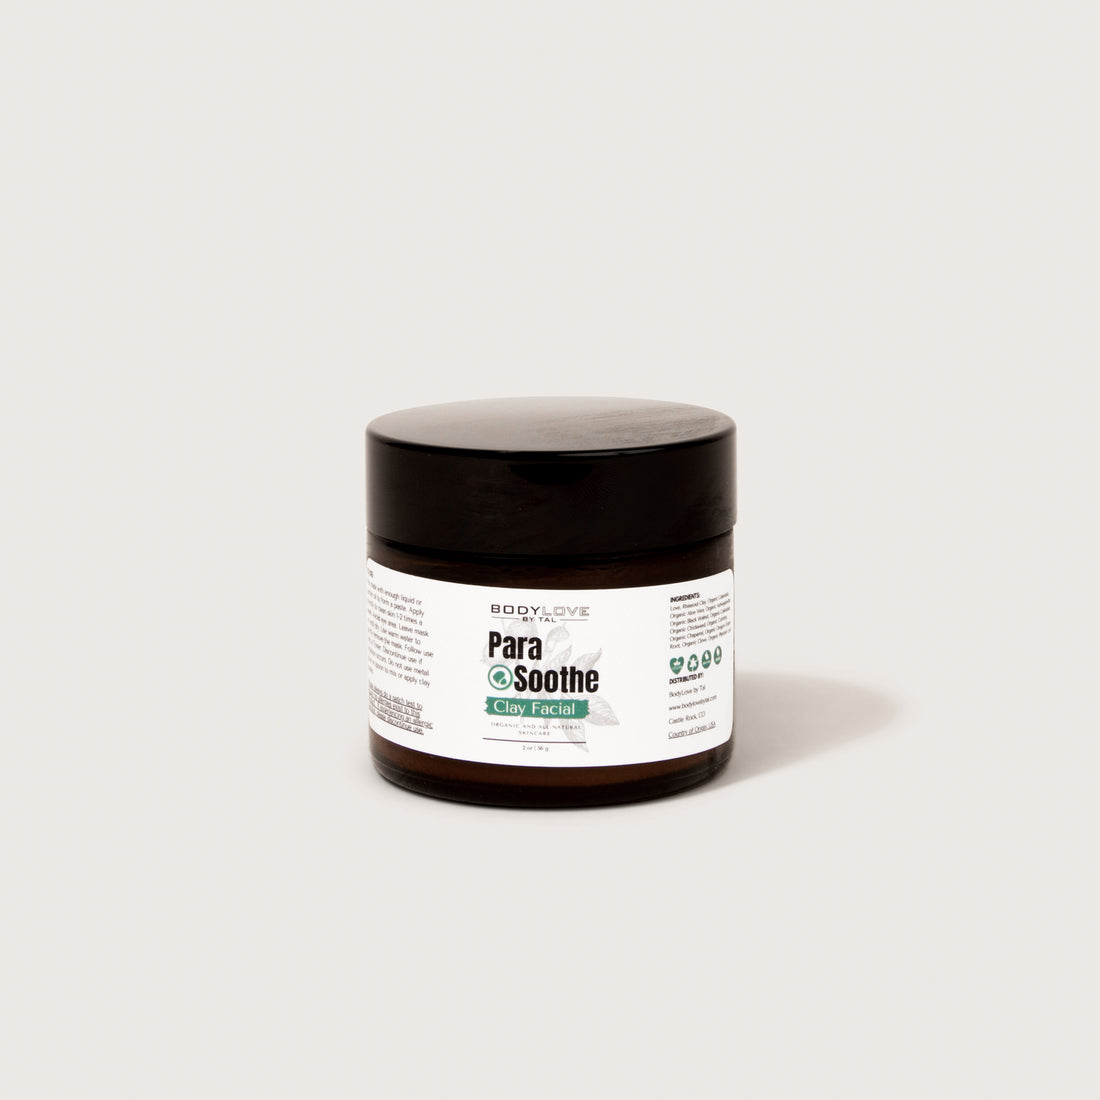 Skintox | Clay Mask